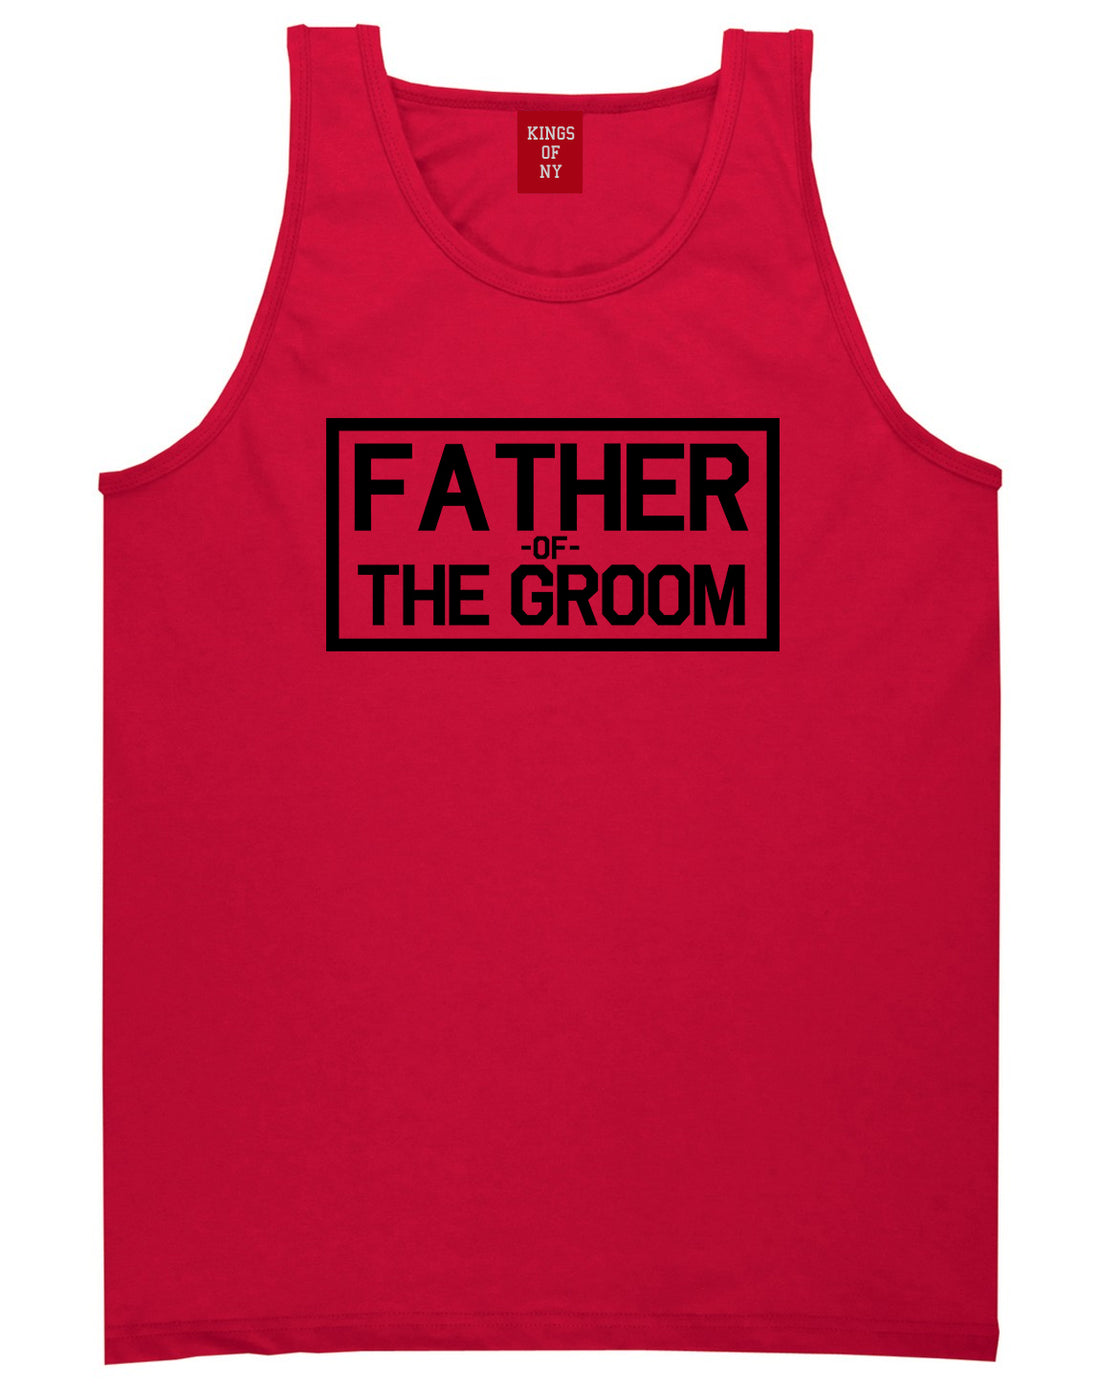 Father_Of_The_Groom Mens Red Tank Top Shirt by Kings Of NY